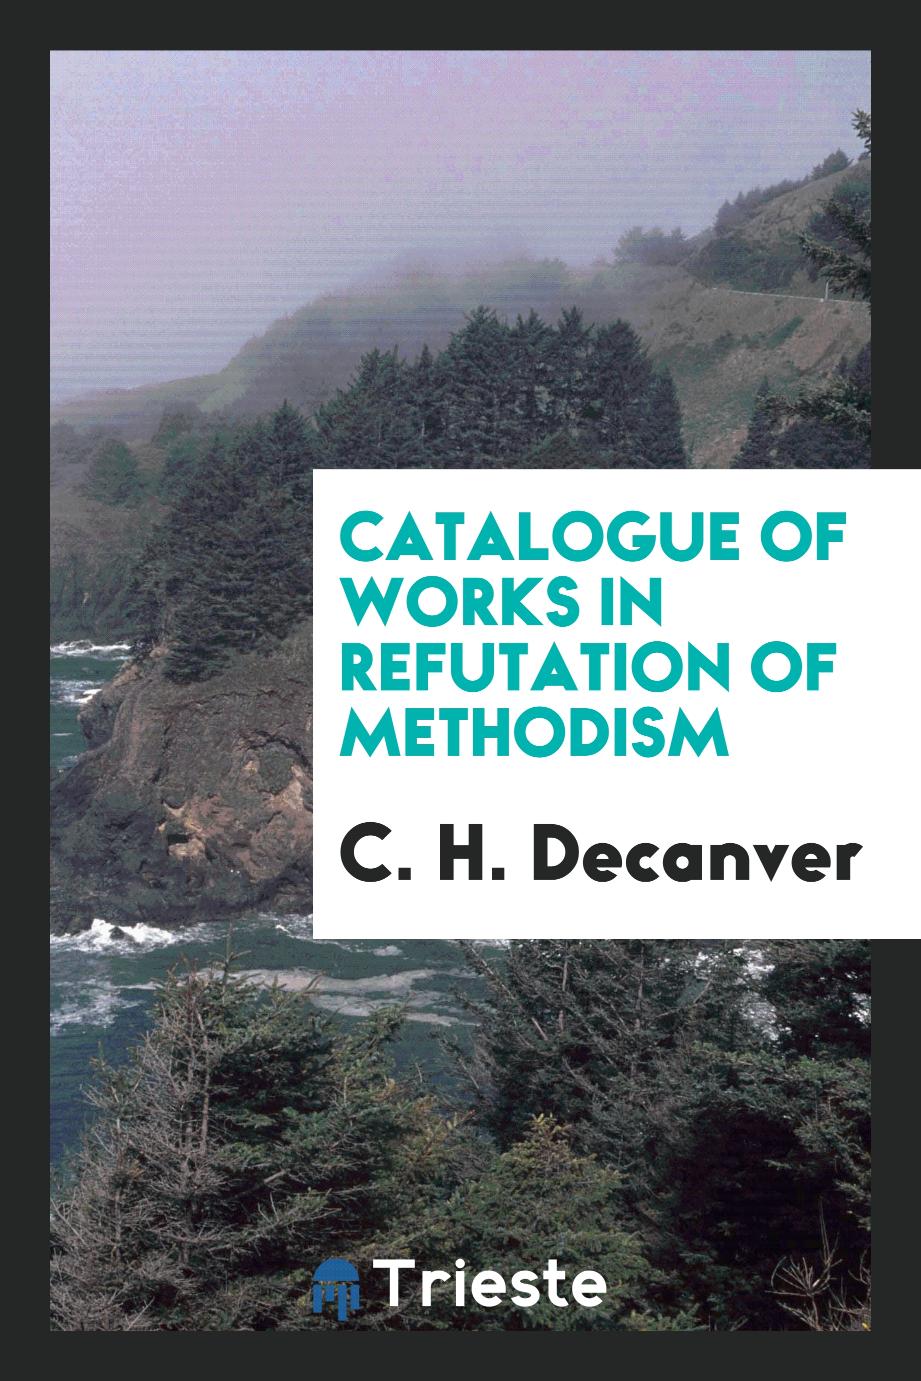 Catalogue of works in refutation of Methodism